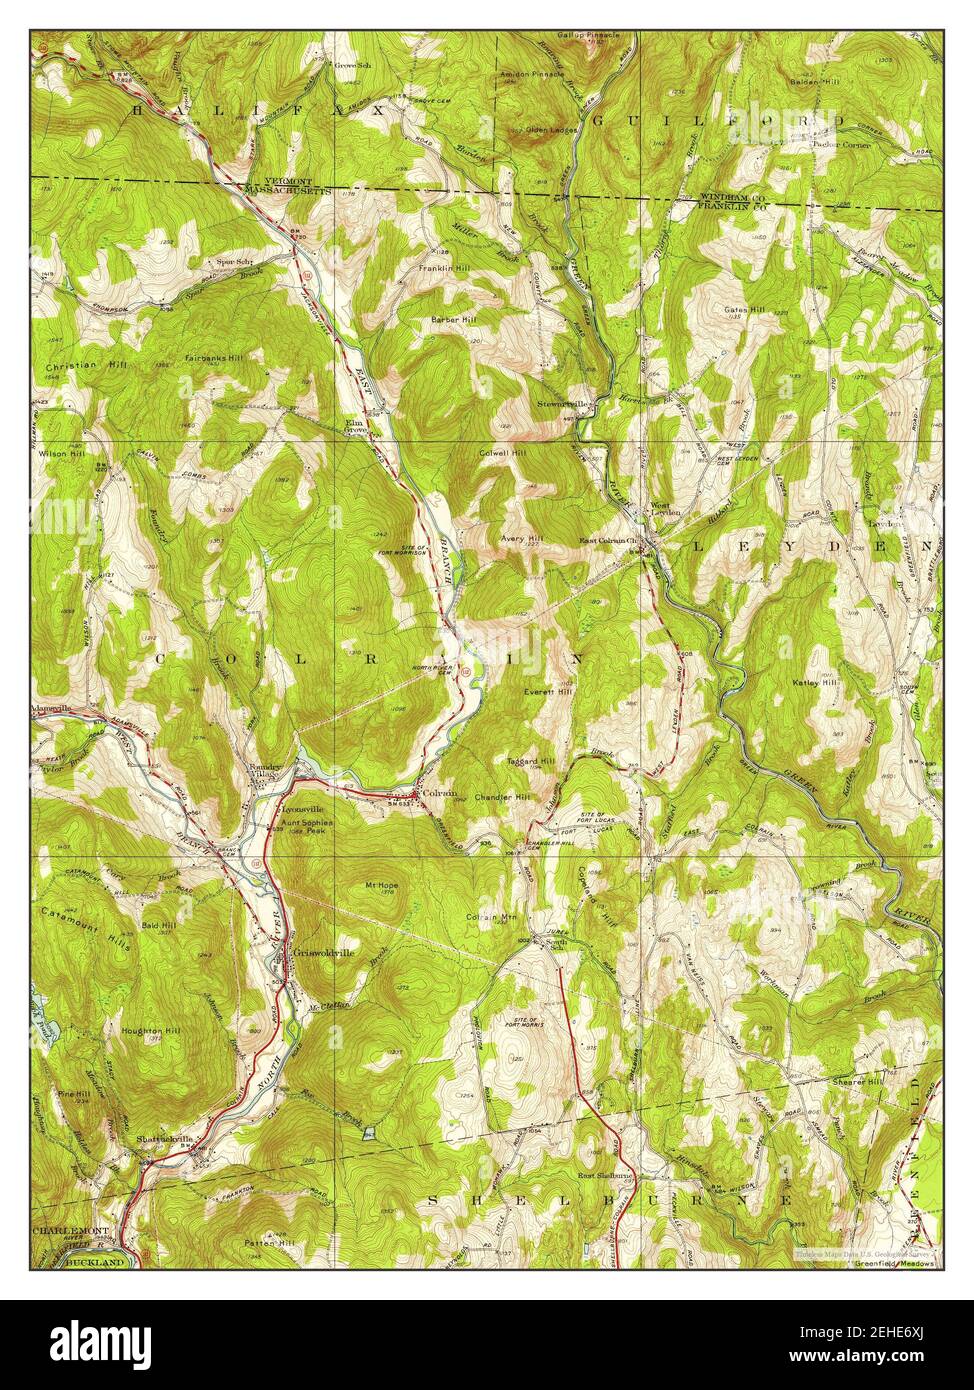 Colrain, Massachusetts, map 1945, 1:24000, United States of America by Timeless Maps, data U.S. Geological Survey Stock Photo